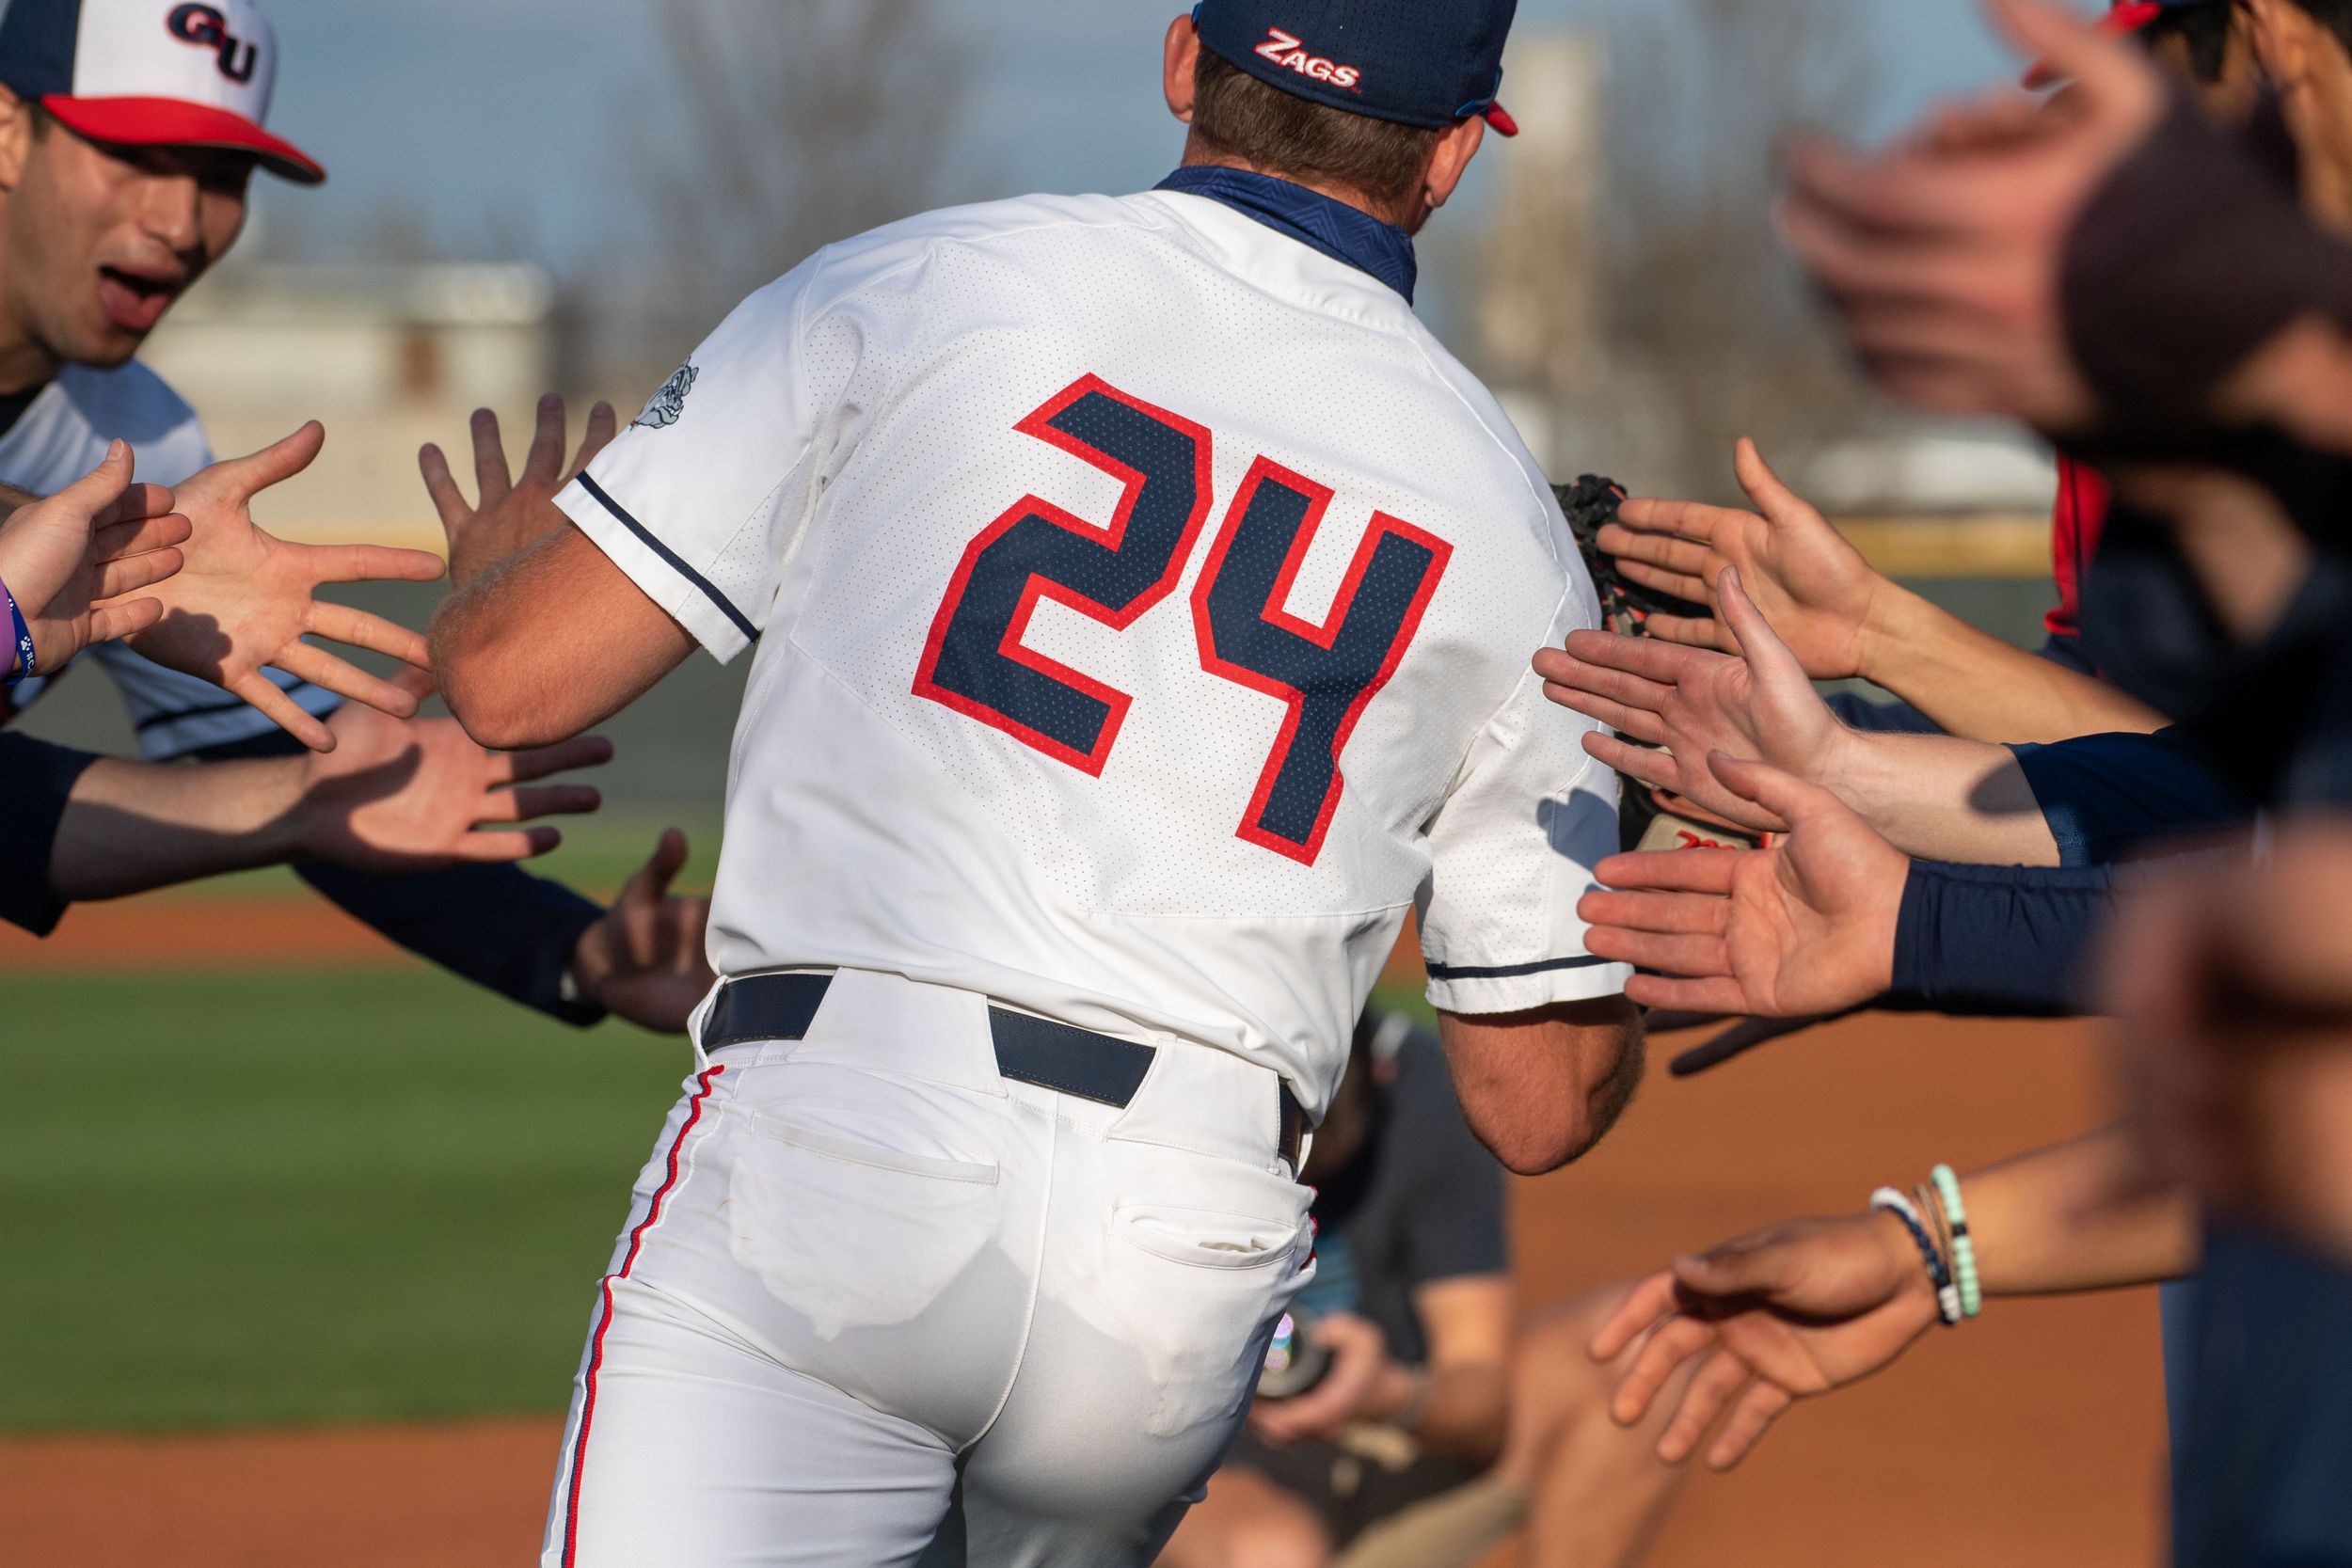 Gonzaga baseball, picked to finish first in WCC, to rely on defense in